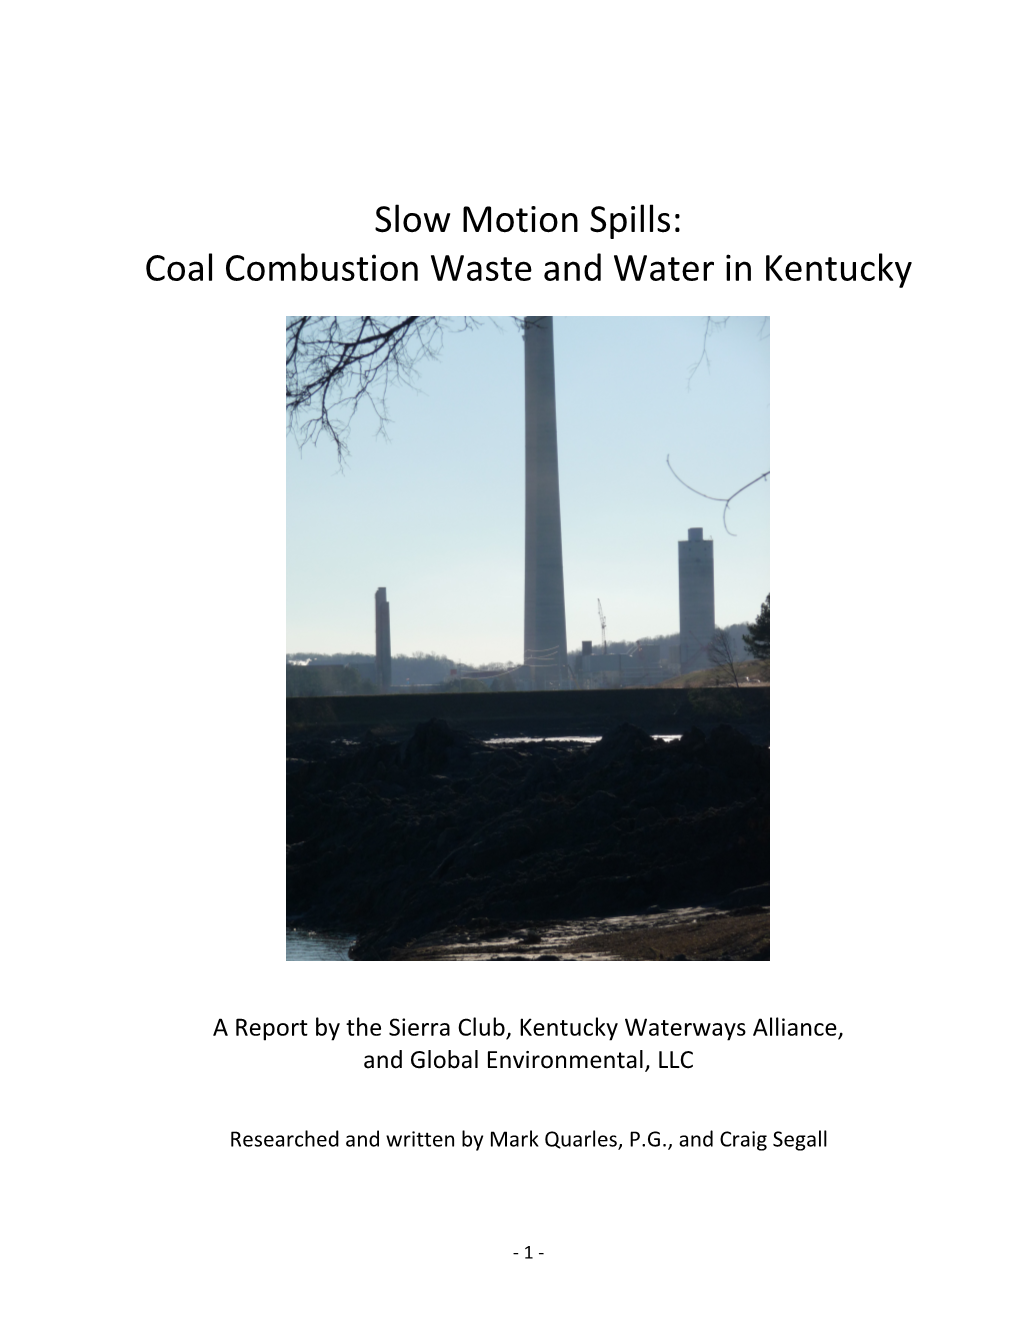 Coal Combustion Waste and Water in Kentucky